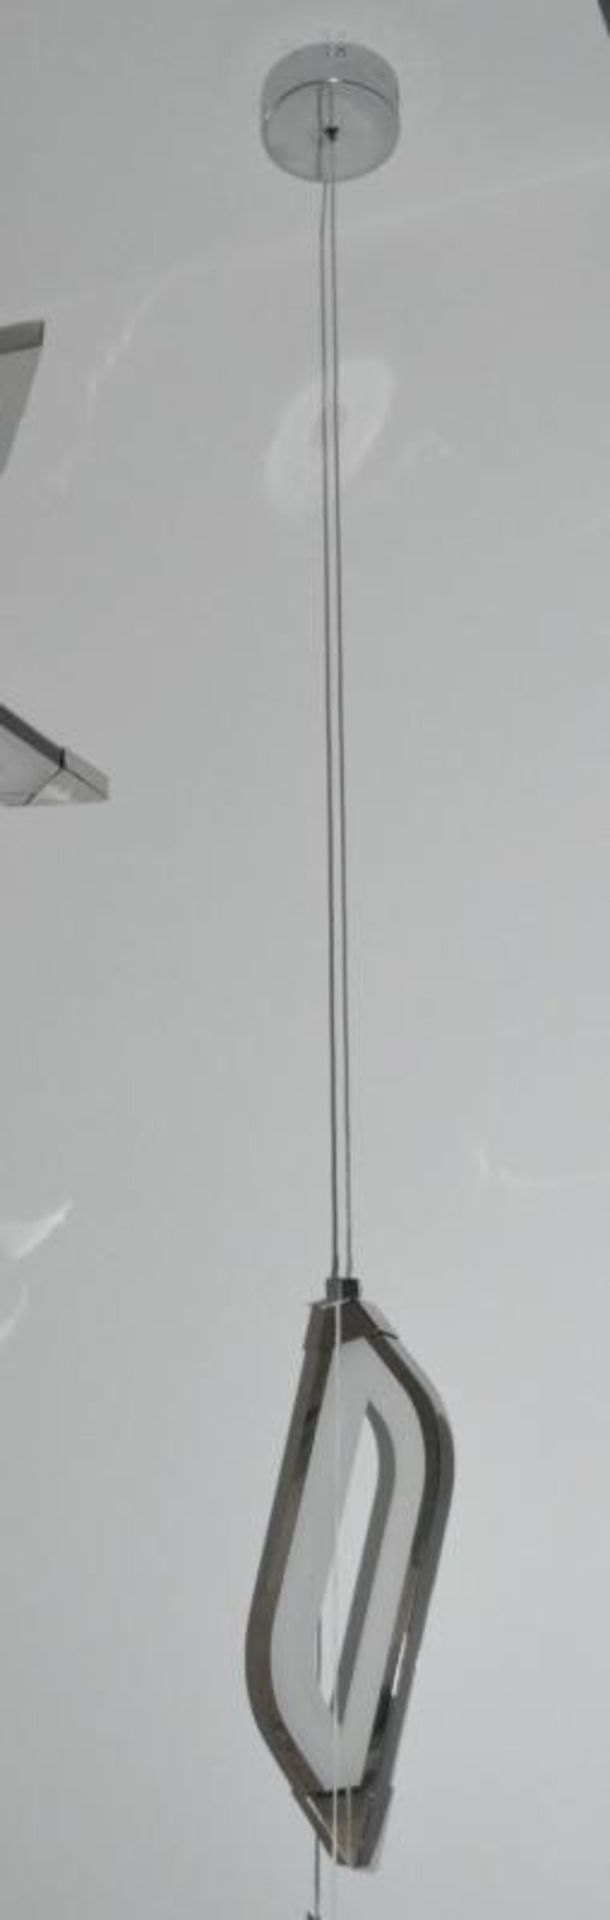 1 x SOLEXA LED Ceiling Pendant In Frosted Acrylics and Chrome Trim - Ex Display Stock - CL298 - Ref - Image 4 of 4